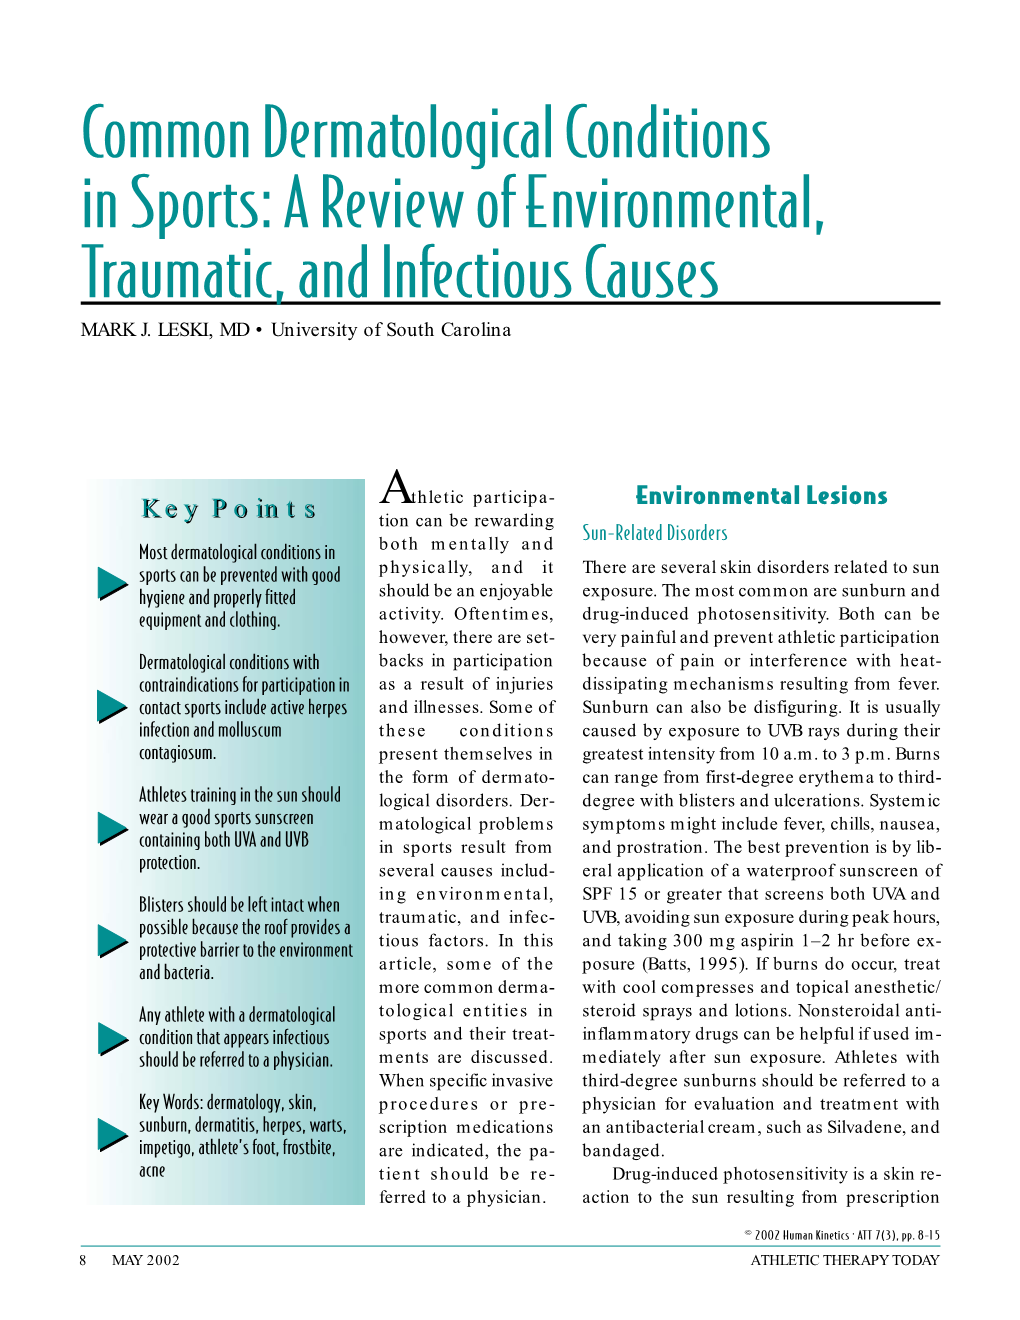 Common Dermatological Conditions in Sports: a Review of Environmental, Traumatic, and Infectious Causes MARK J